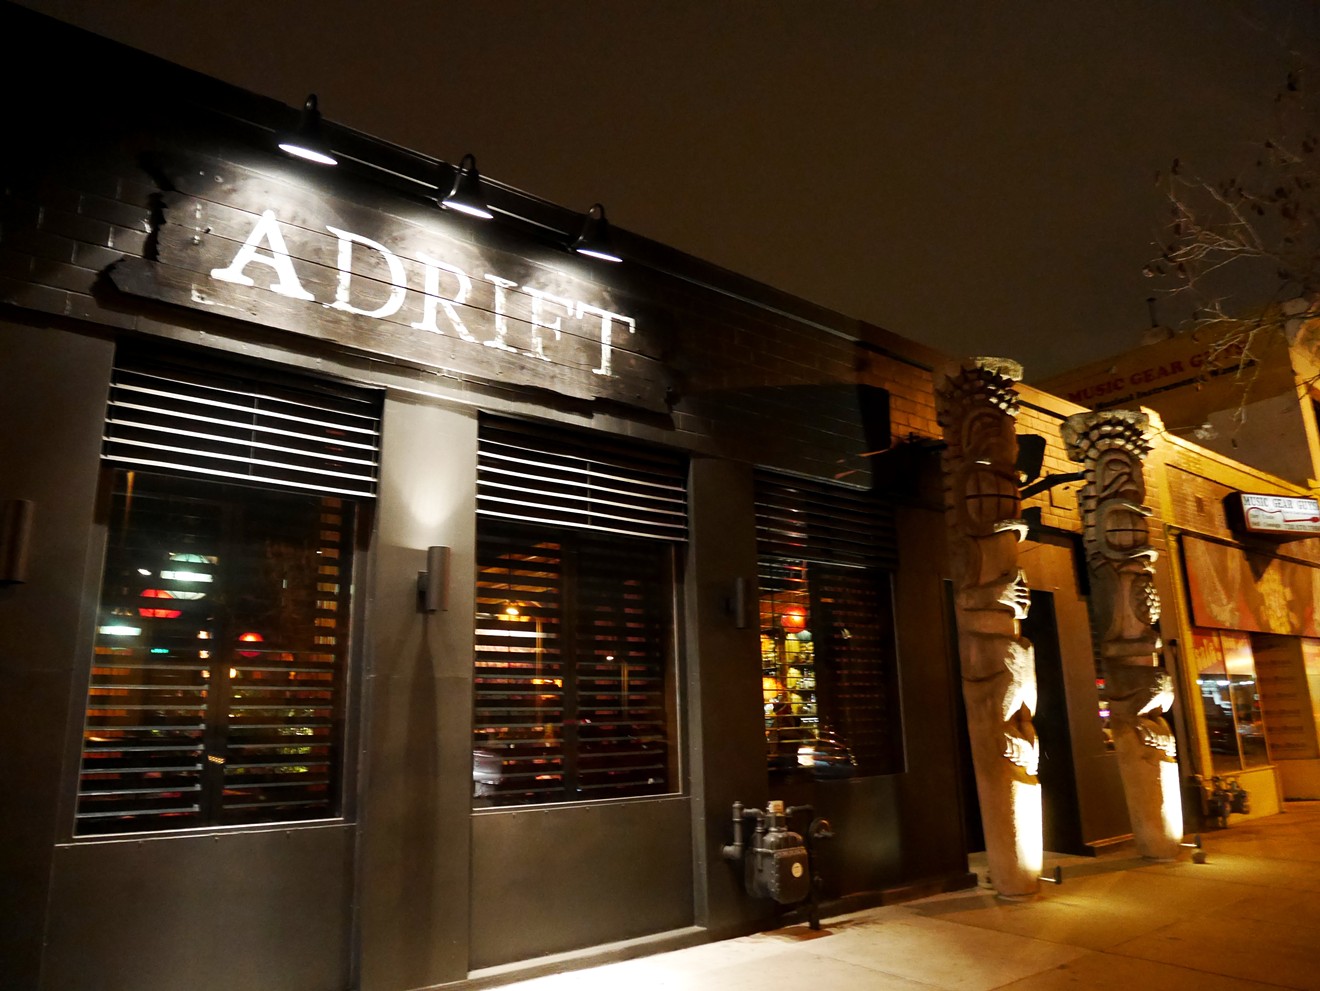 Step back in time into the retro dining room at Adrift.